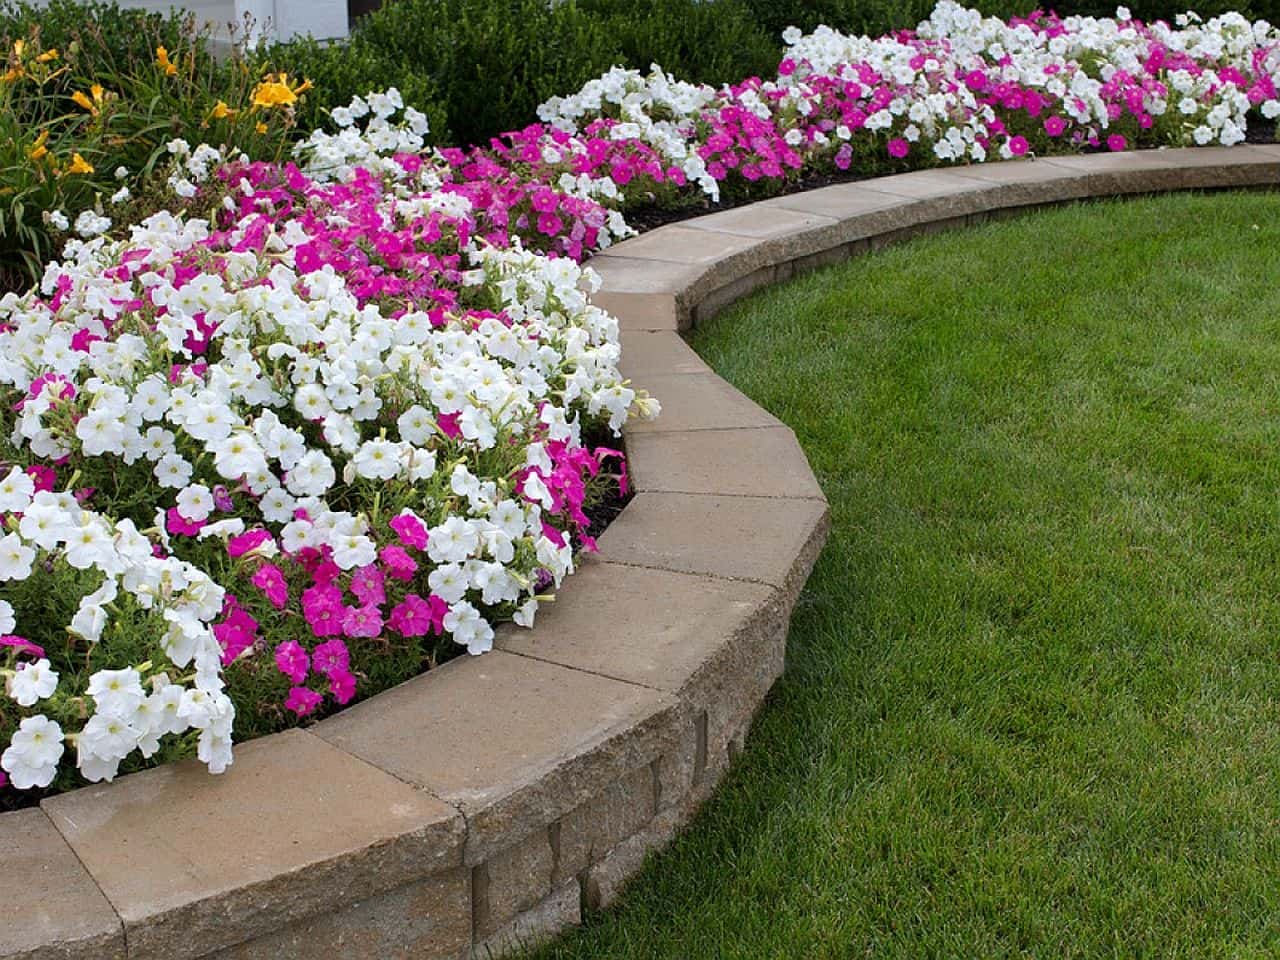 Pink and White Petunia Flower Bed with Rock Retaining Wall